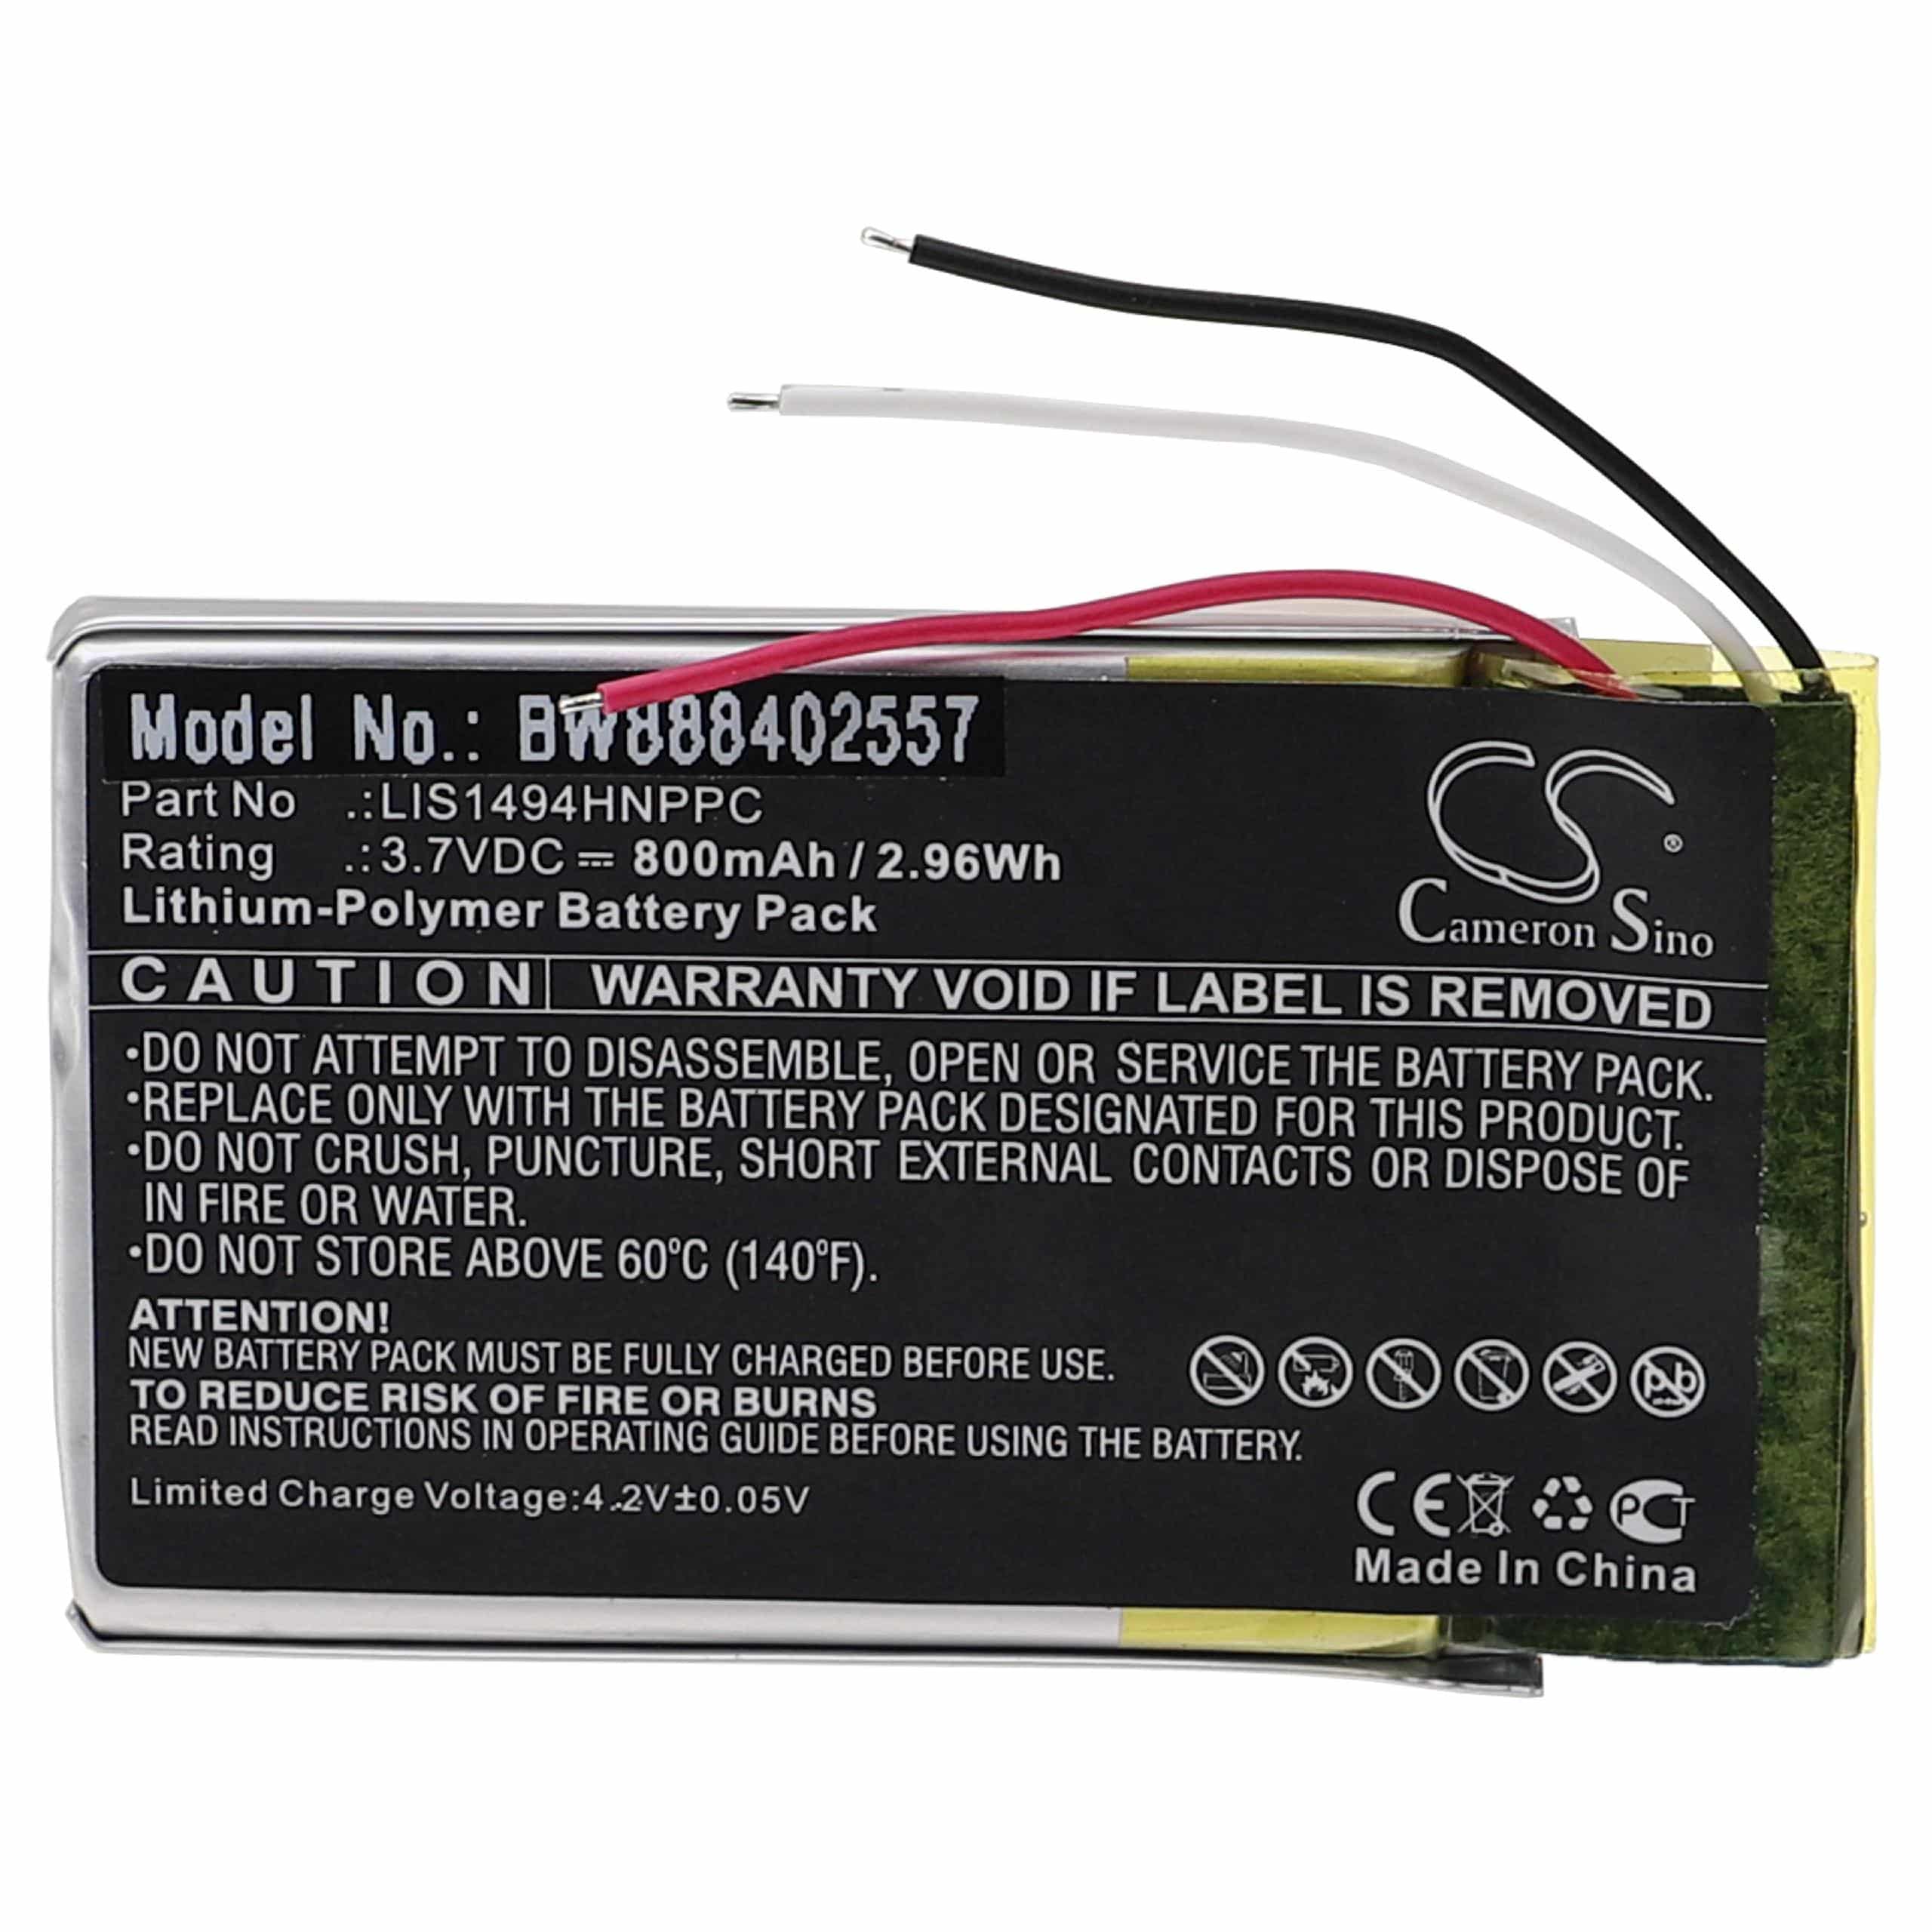 Wireless Headset Battery Replacement for Sony LIS1494HNPPC - 800mAh 3.7V Li-polymer